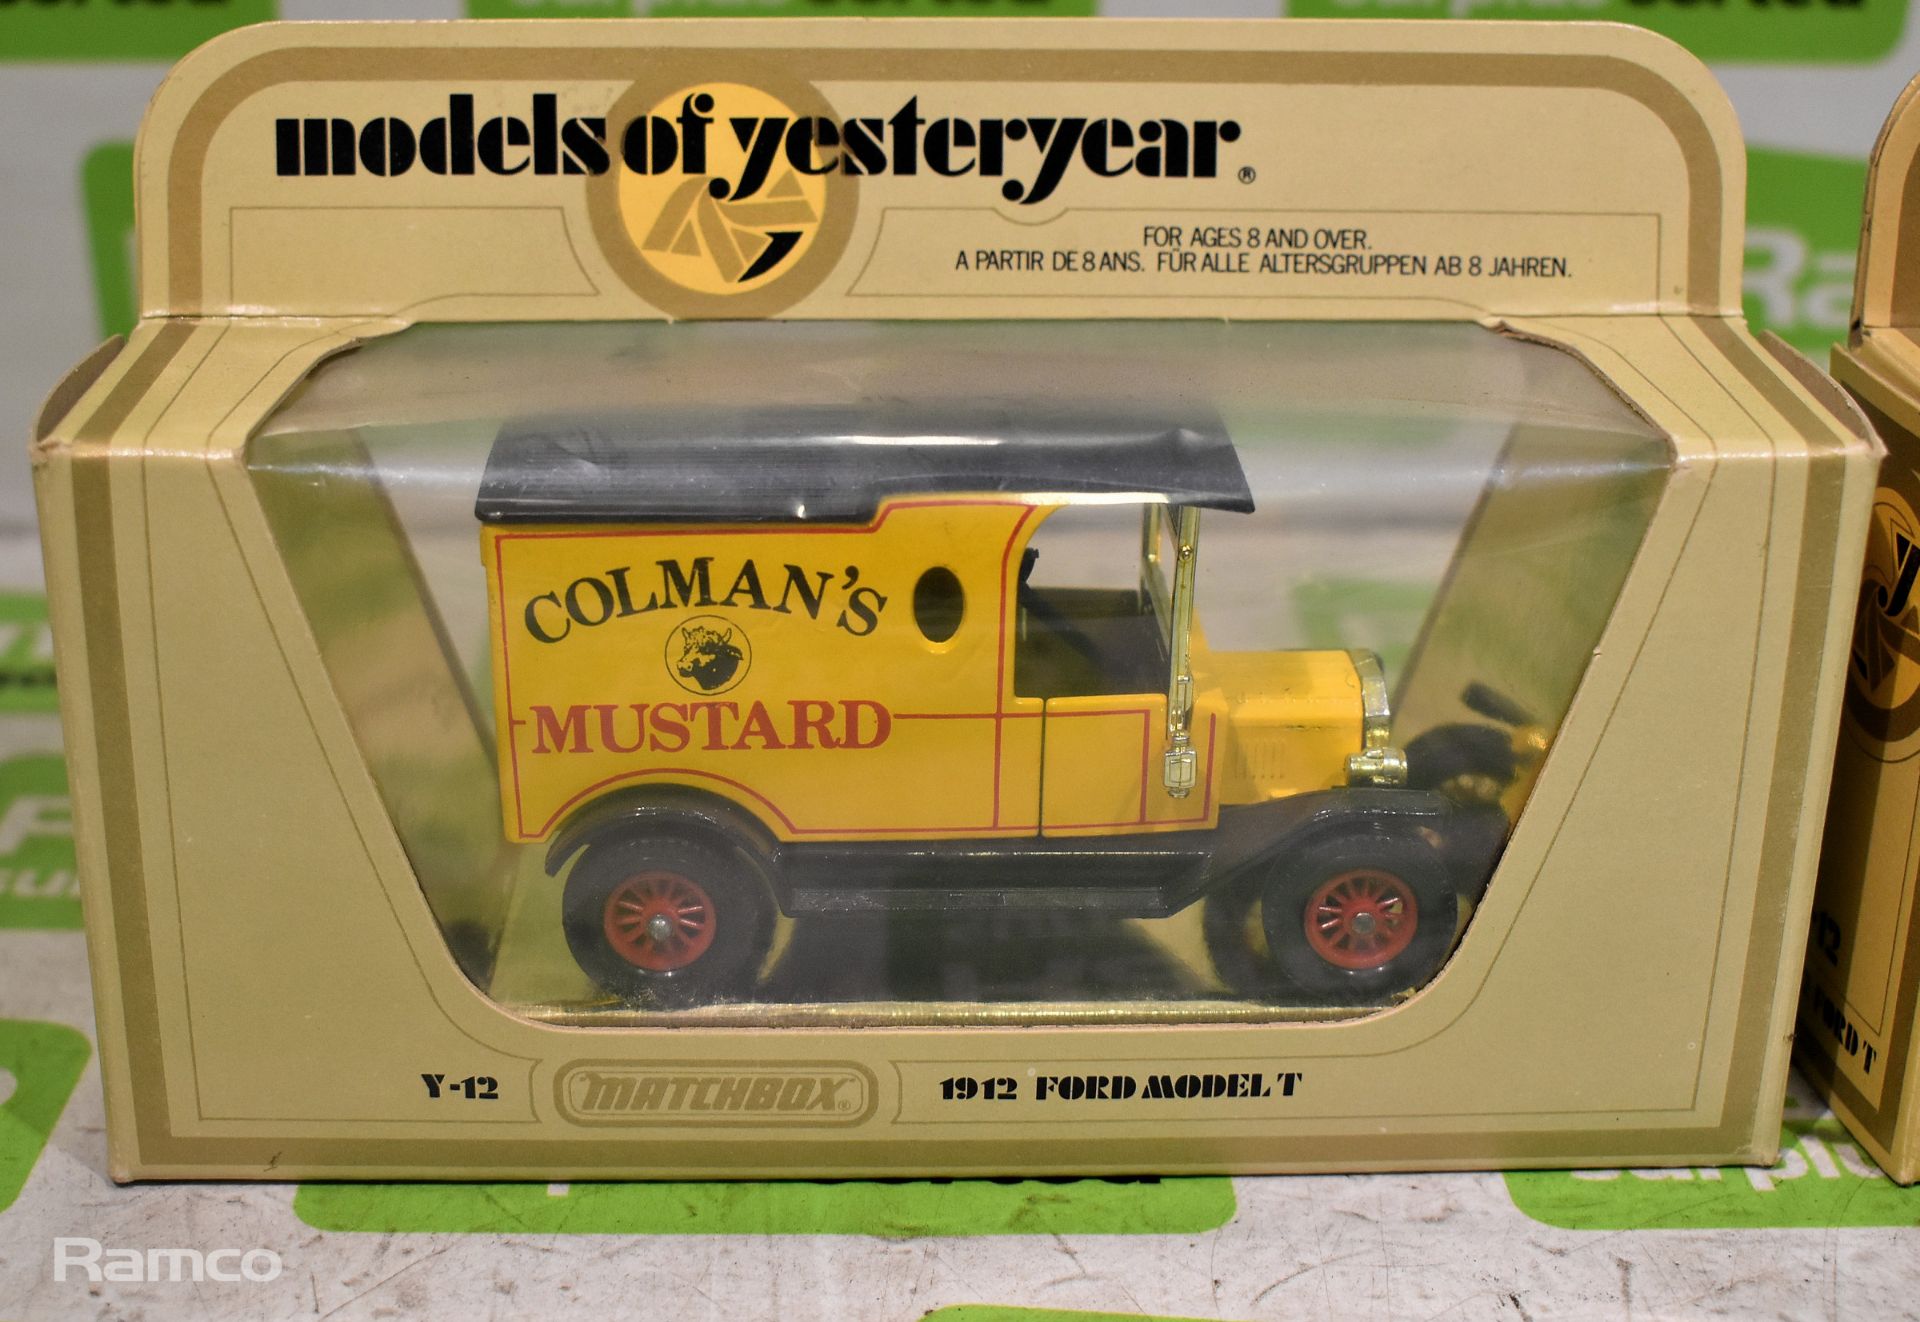 Models of Yesteryear Y-12 - 1912 Ford Model T - Bird's Custard Powder Livery - 1:35 scale model - Image 2 of 5